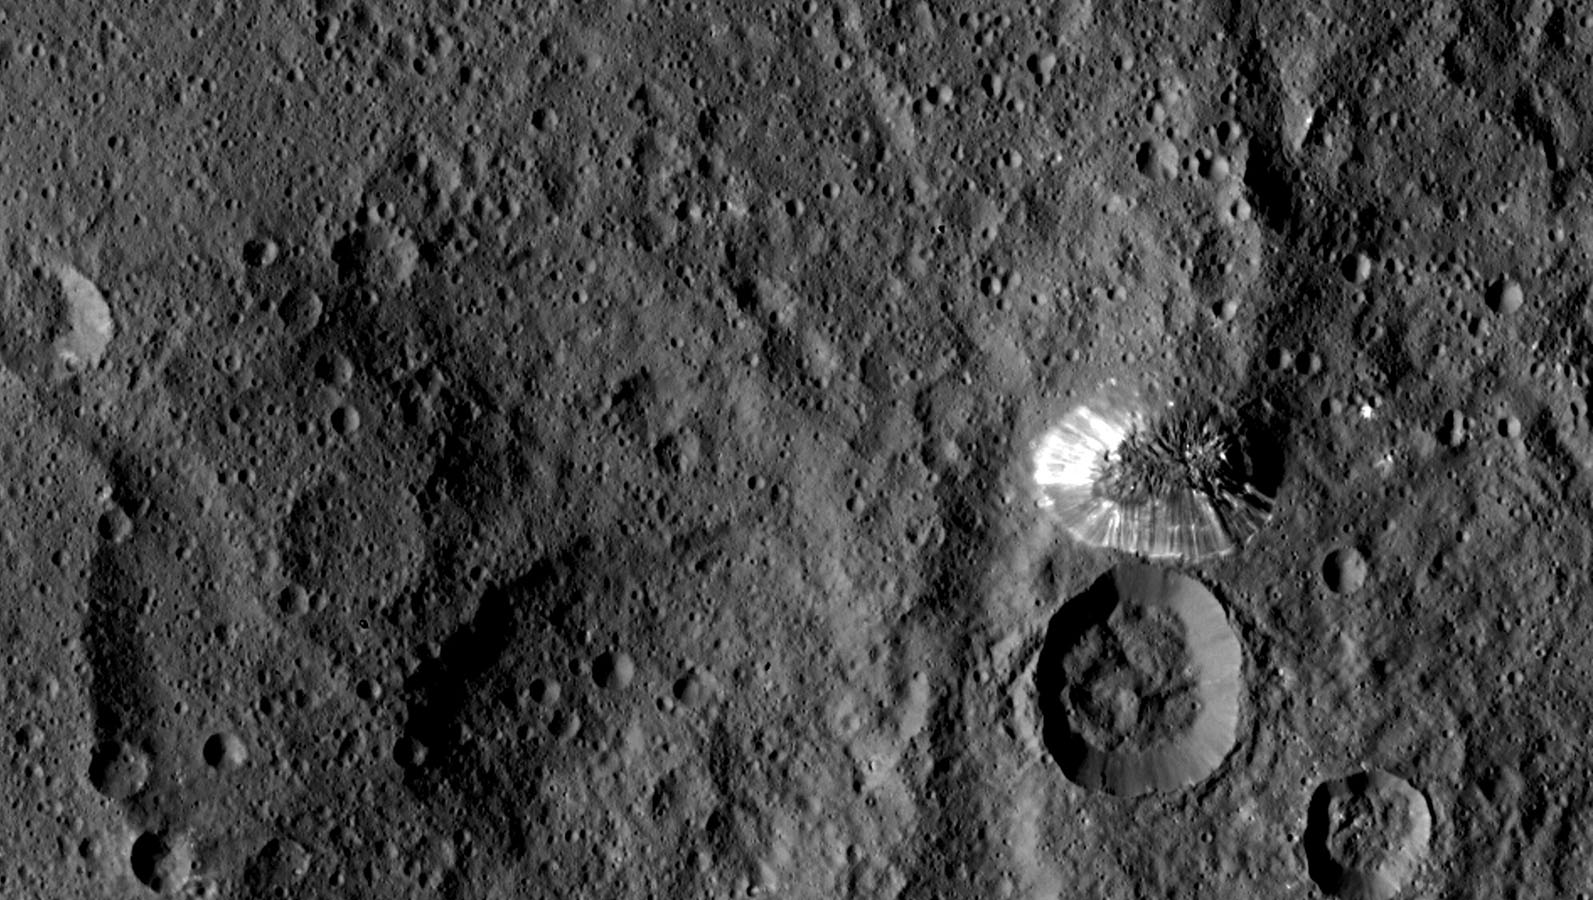 Video animation of various views of Ceres